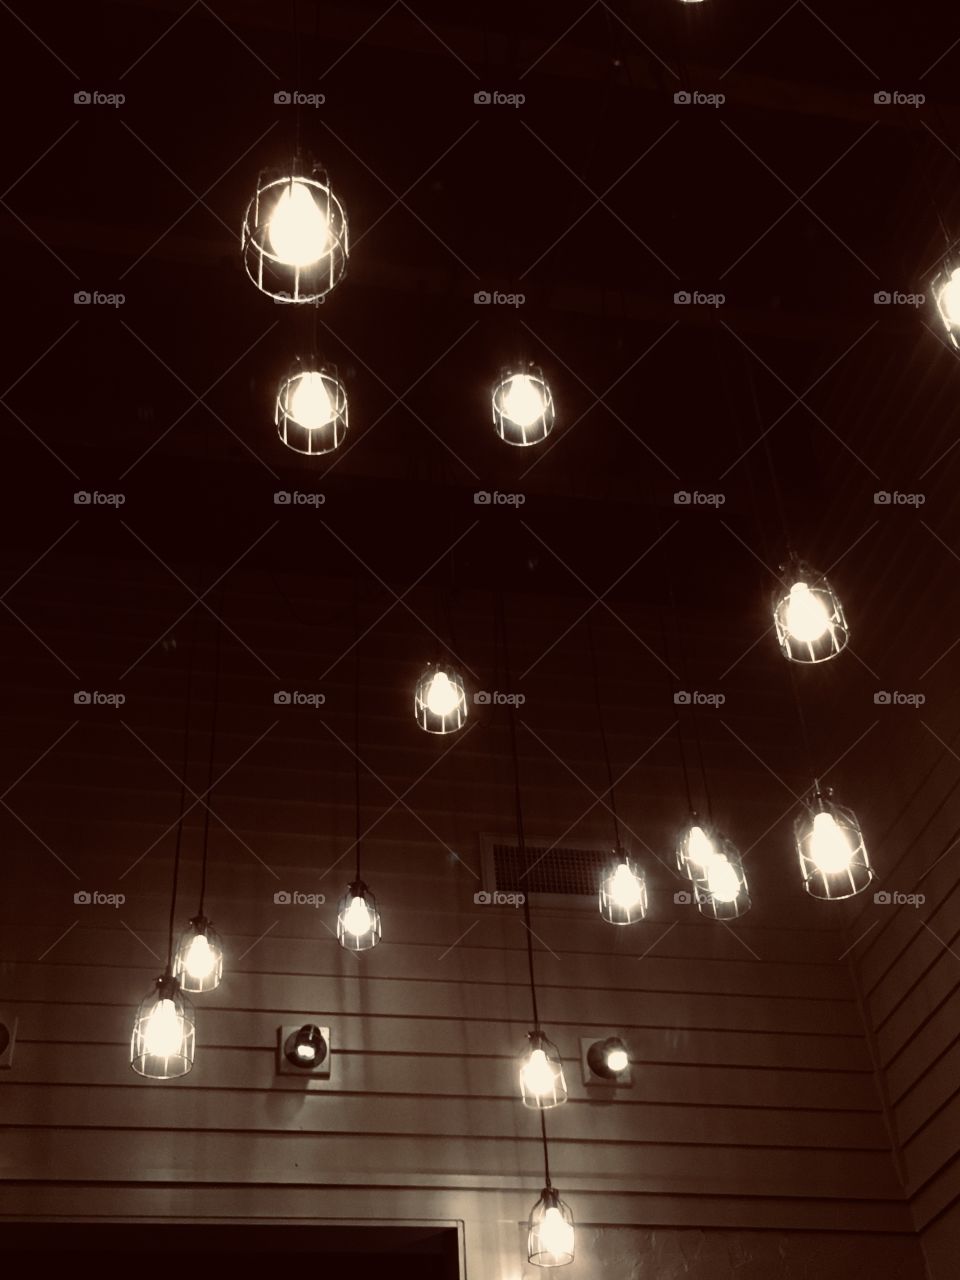 Ceiling lights at chill’s in winter garden, Florida 